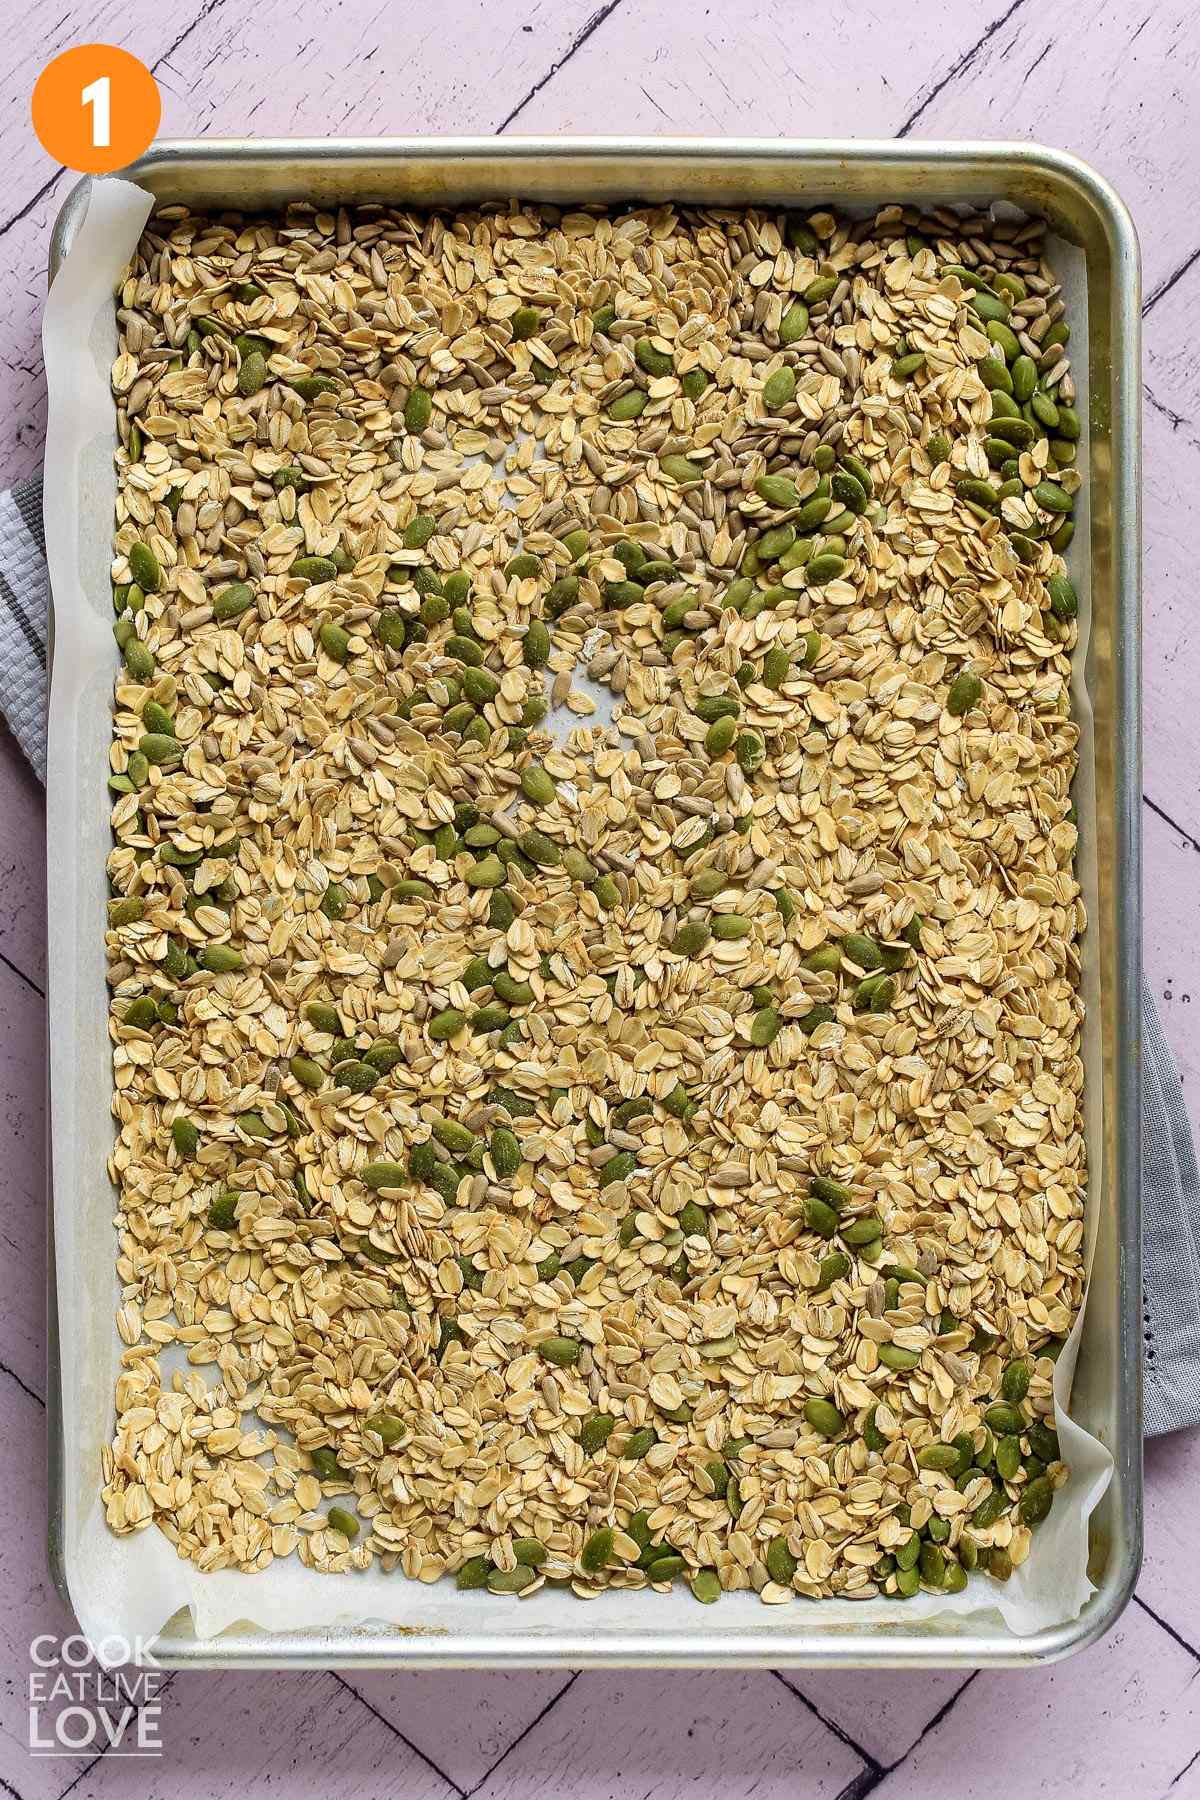 Oats, seeds and almonds on baking sheet ready to toast in the oven.